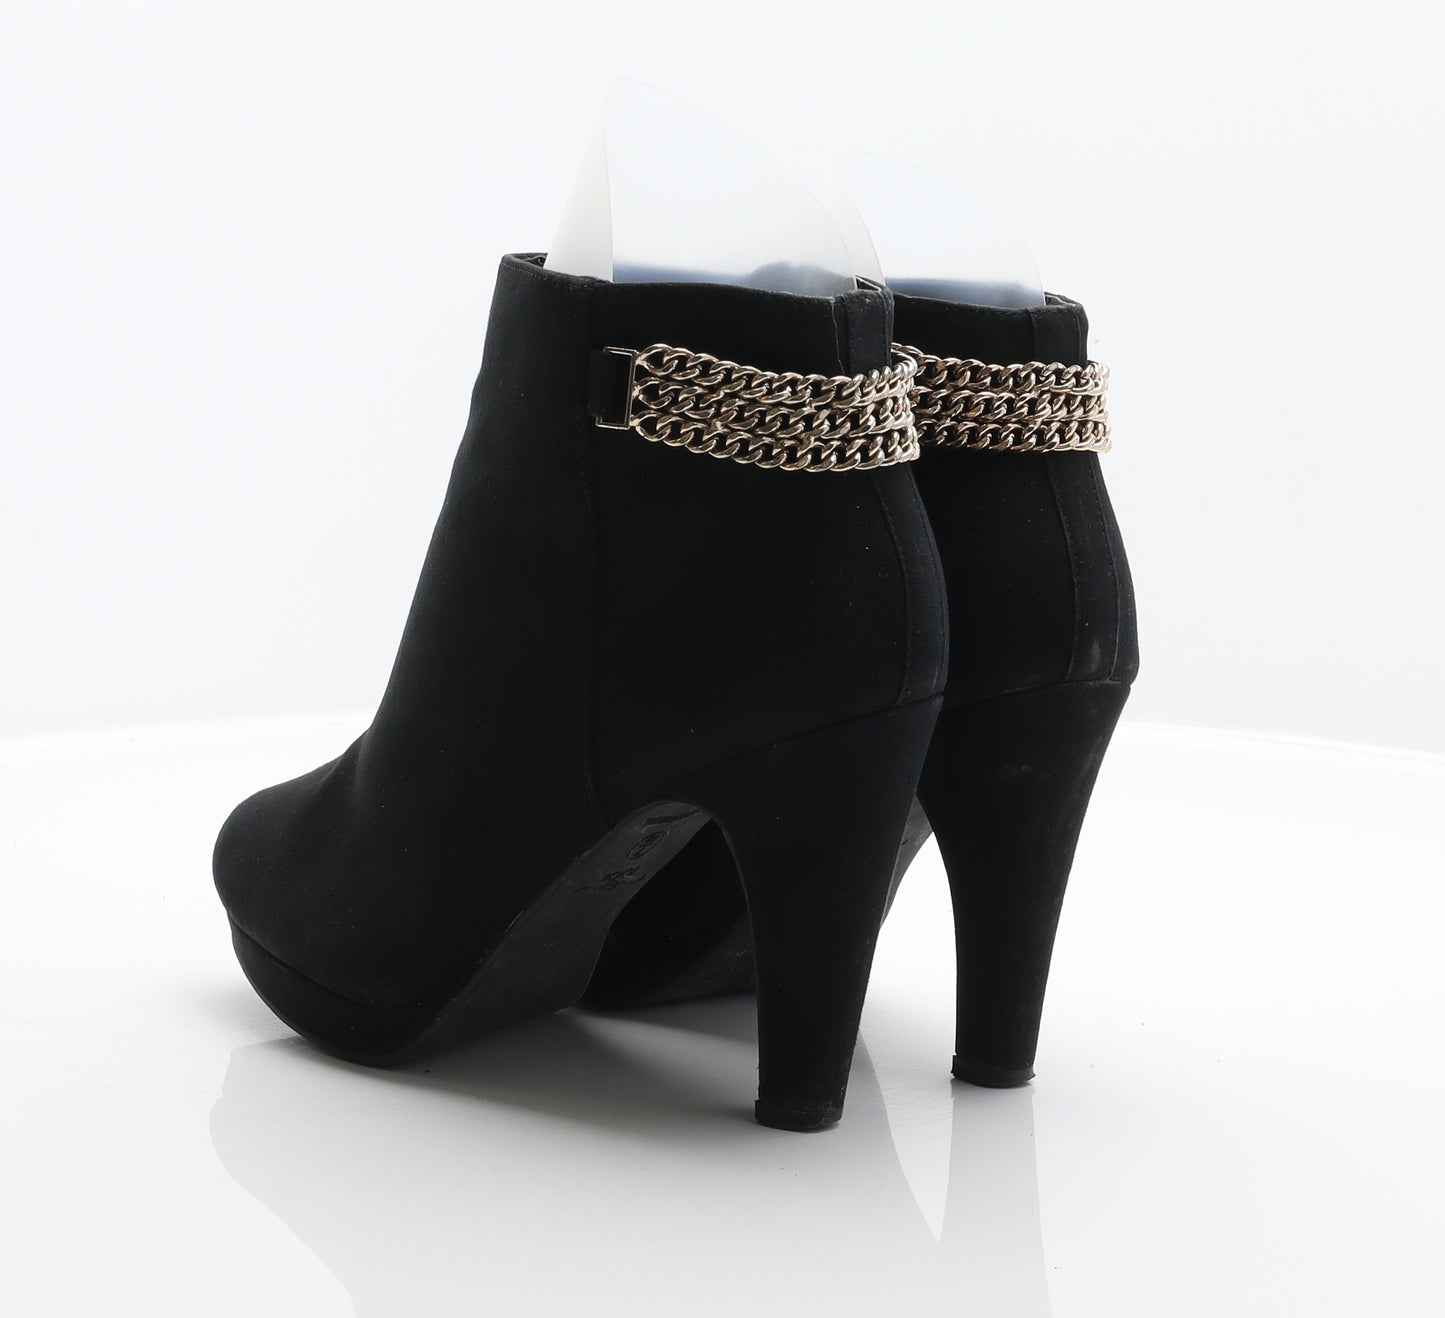 New Look Womens Black Polyester Bootie Boot UK 7 40 - Chain detail